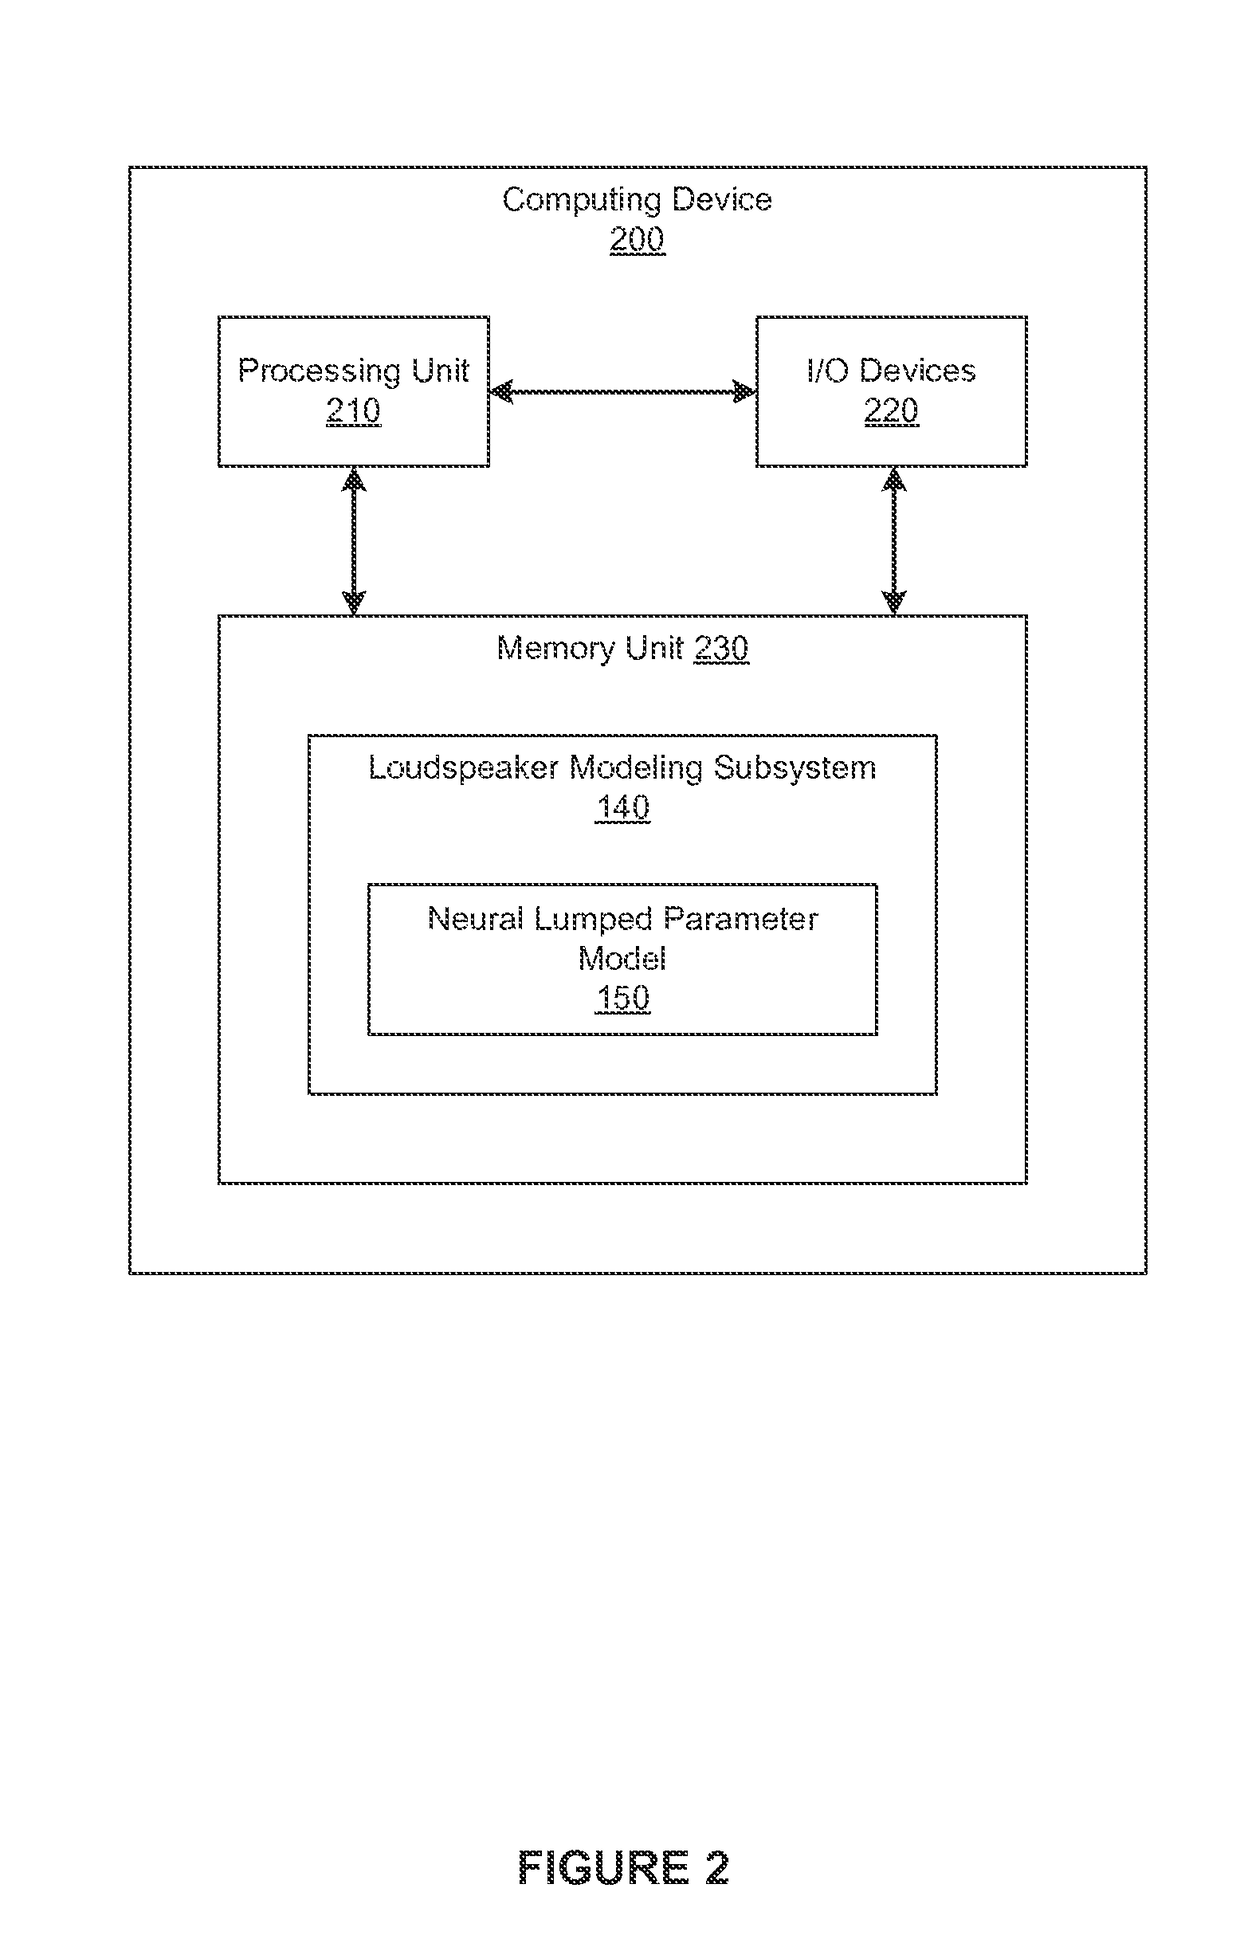 Modeling loudspeakers based on cascading lumped parameter models with neural networks